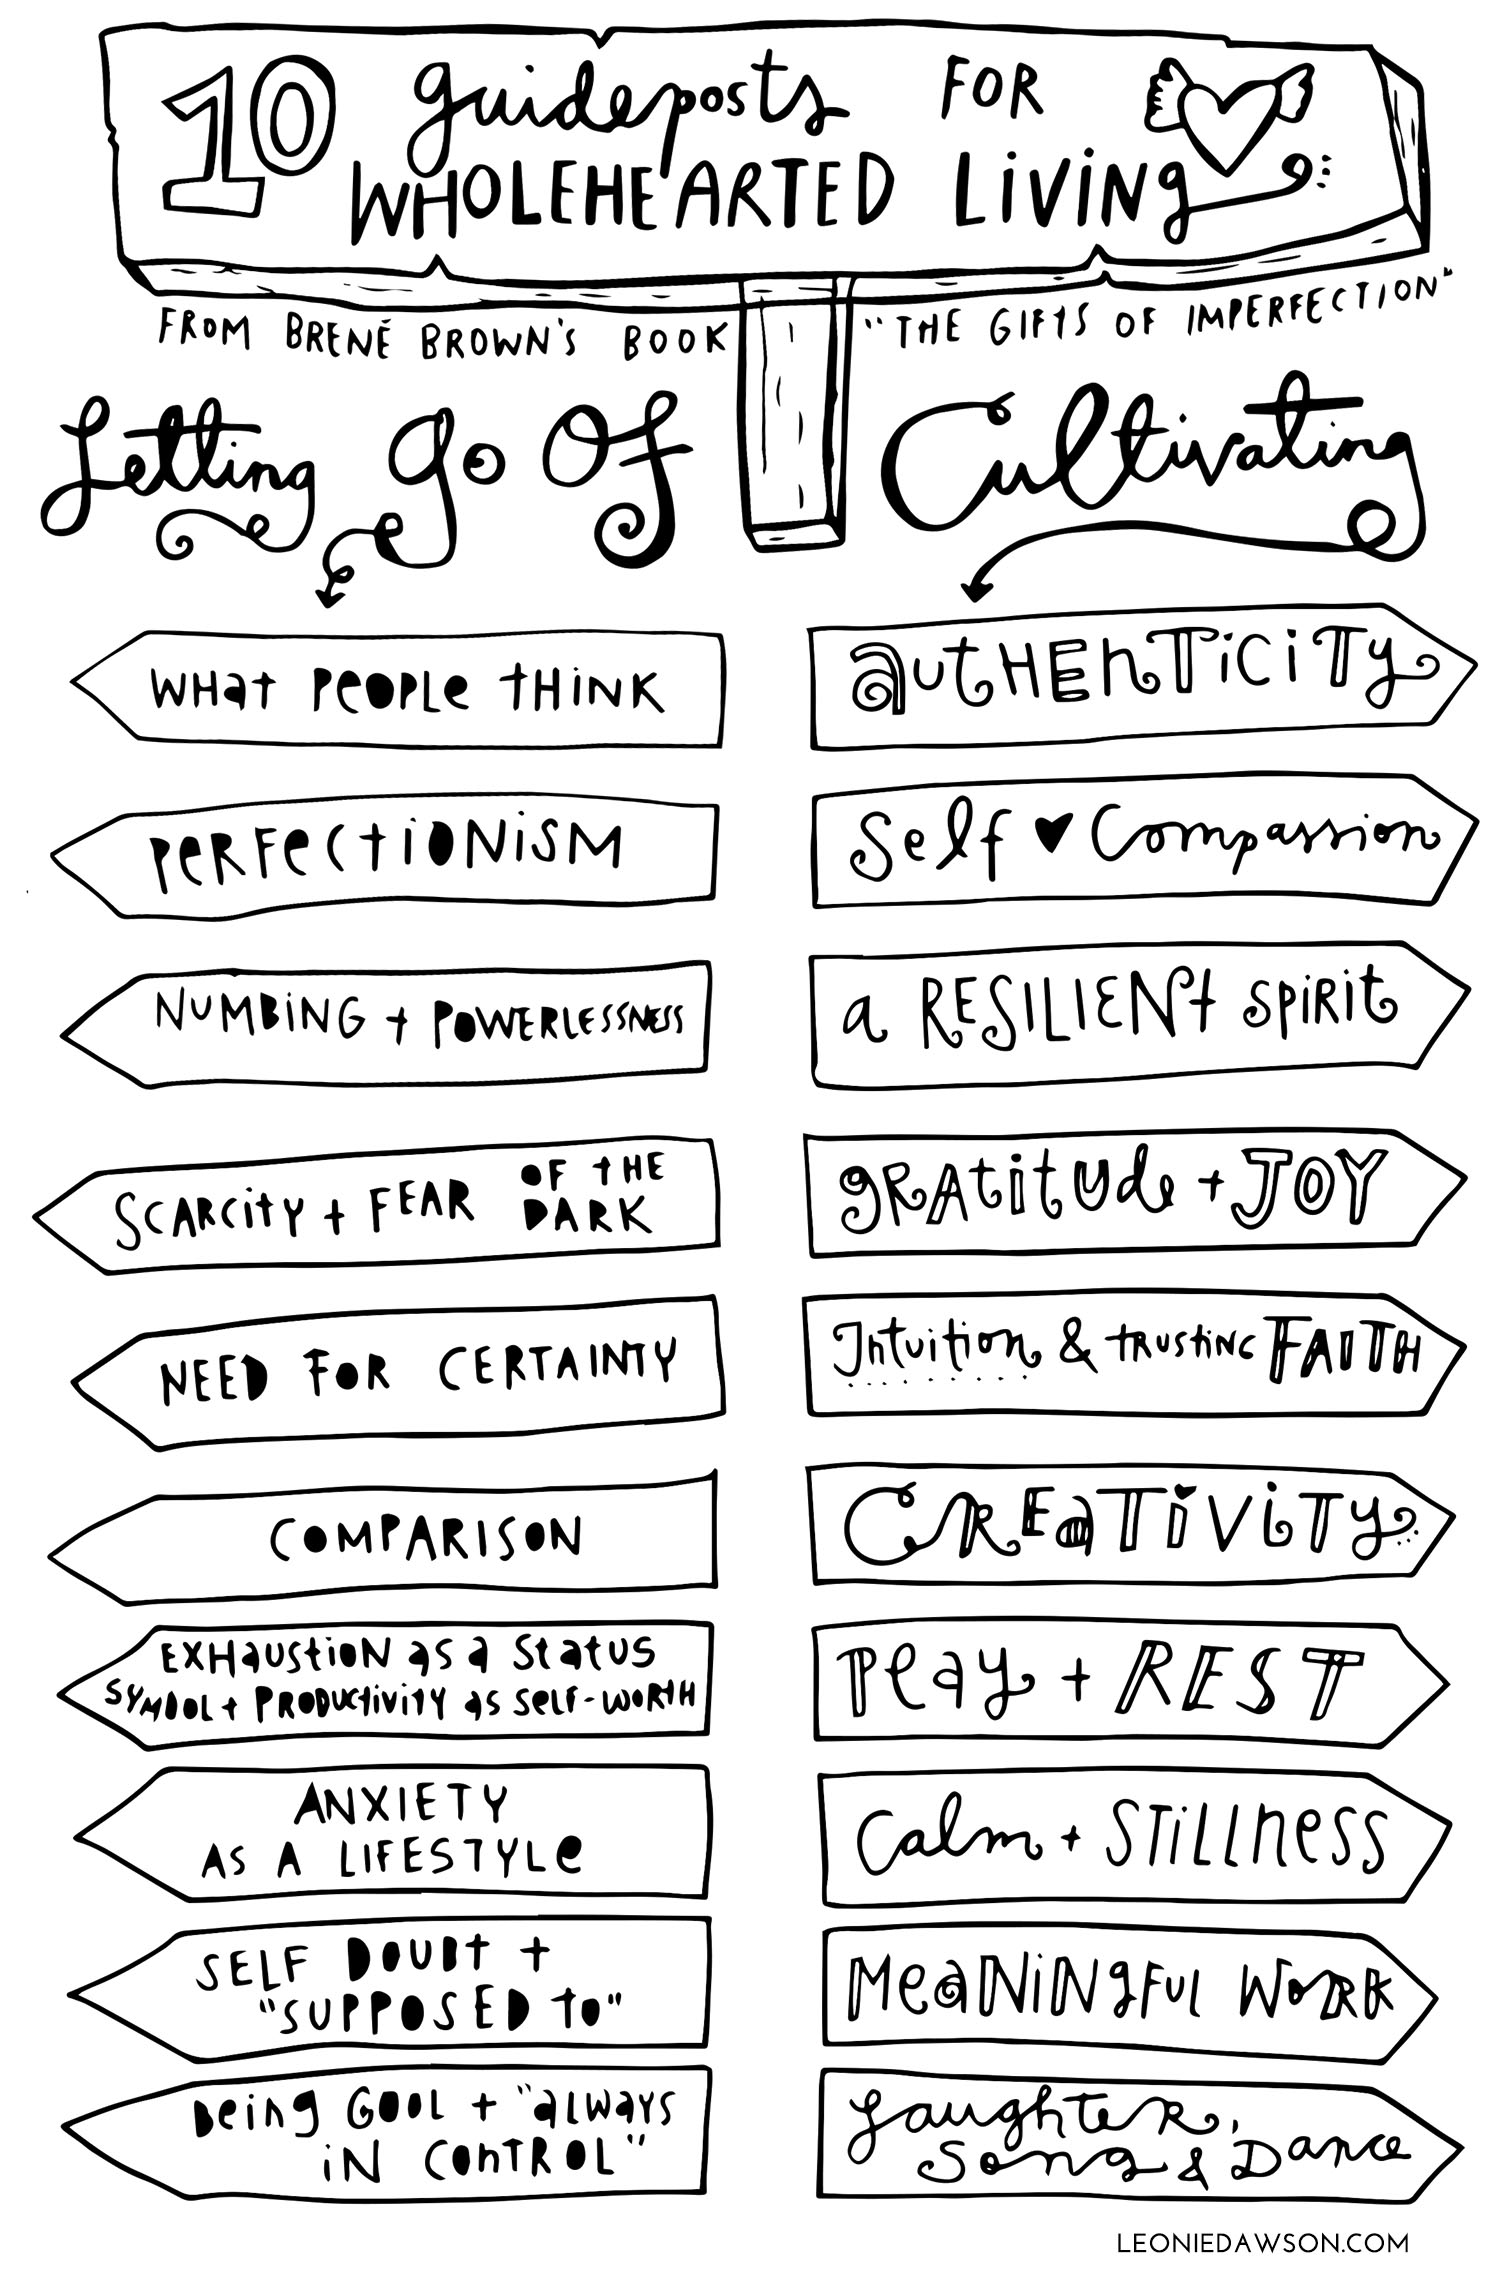 FREE POSTER + COLOURING PAGE: Brené Brown’s 10 Guideposts For